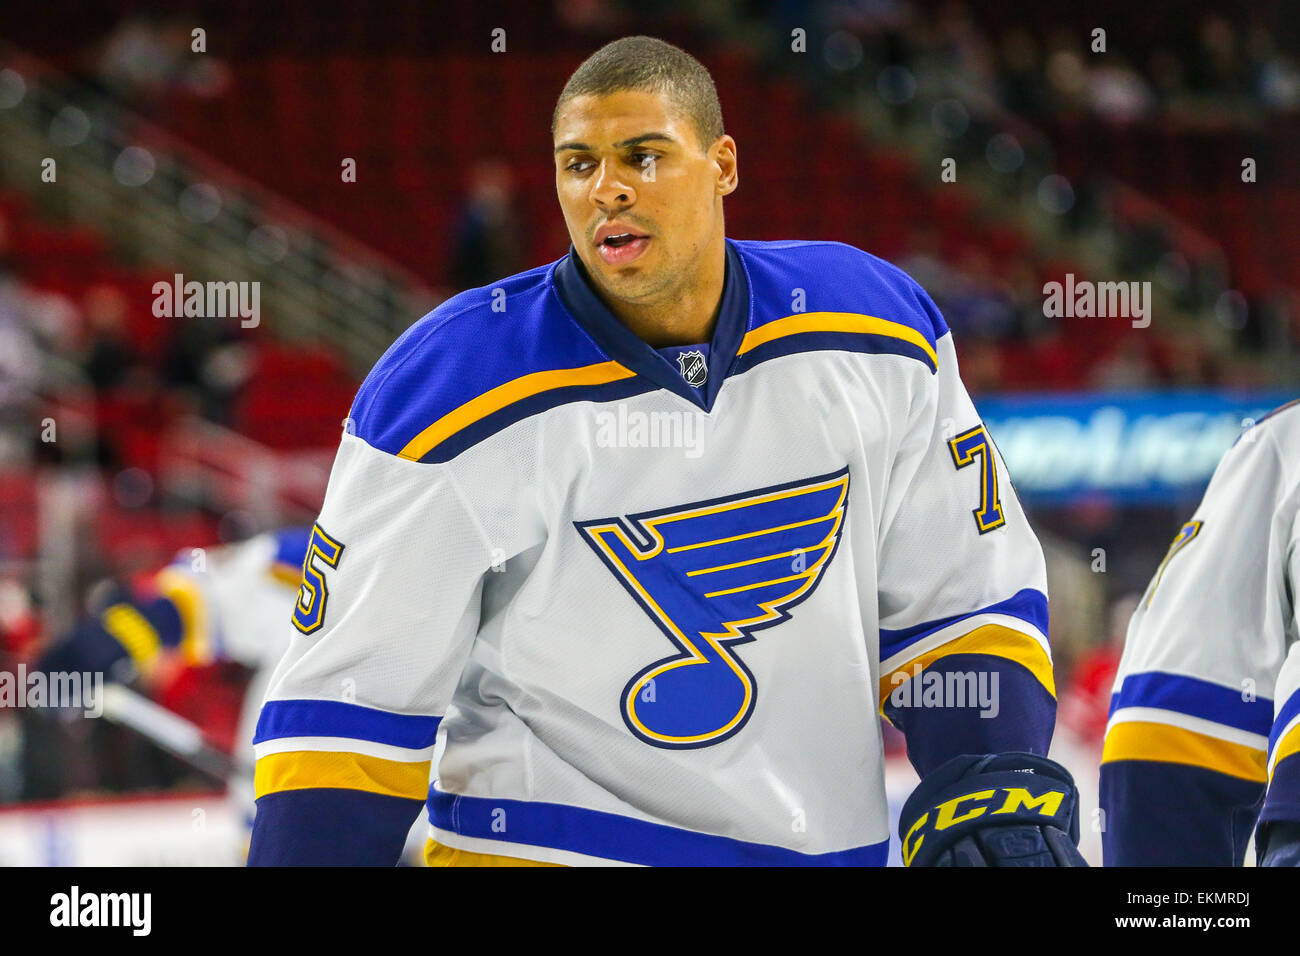 6,547 Ryan Reaves Photos & High Res Pictures - Getty Images